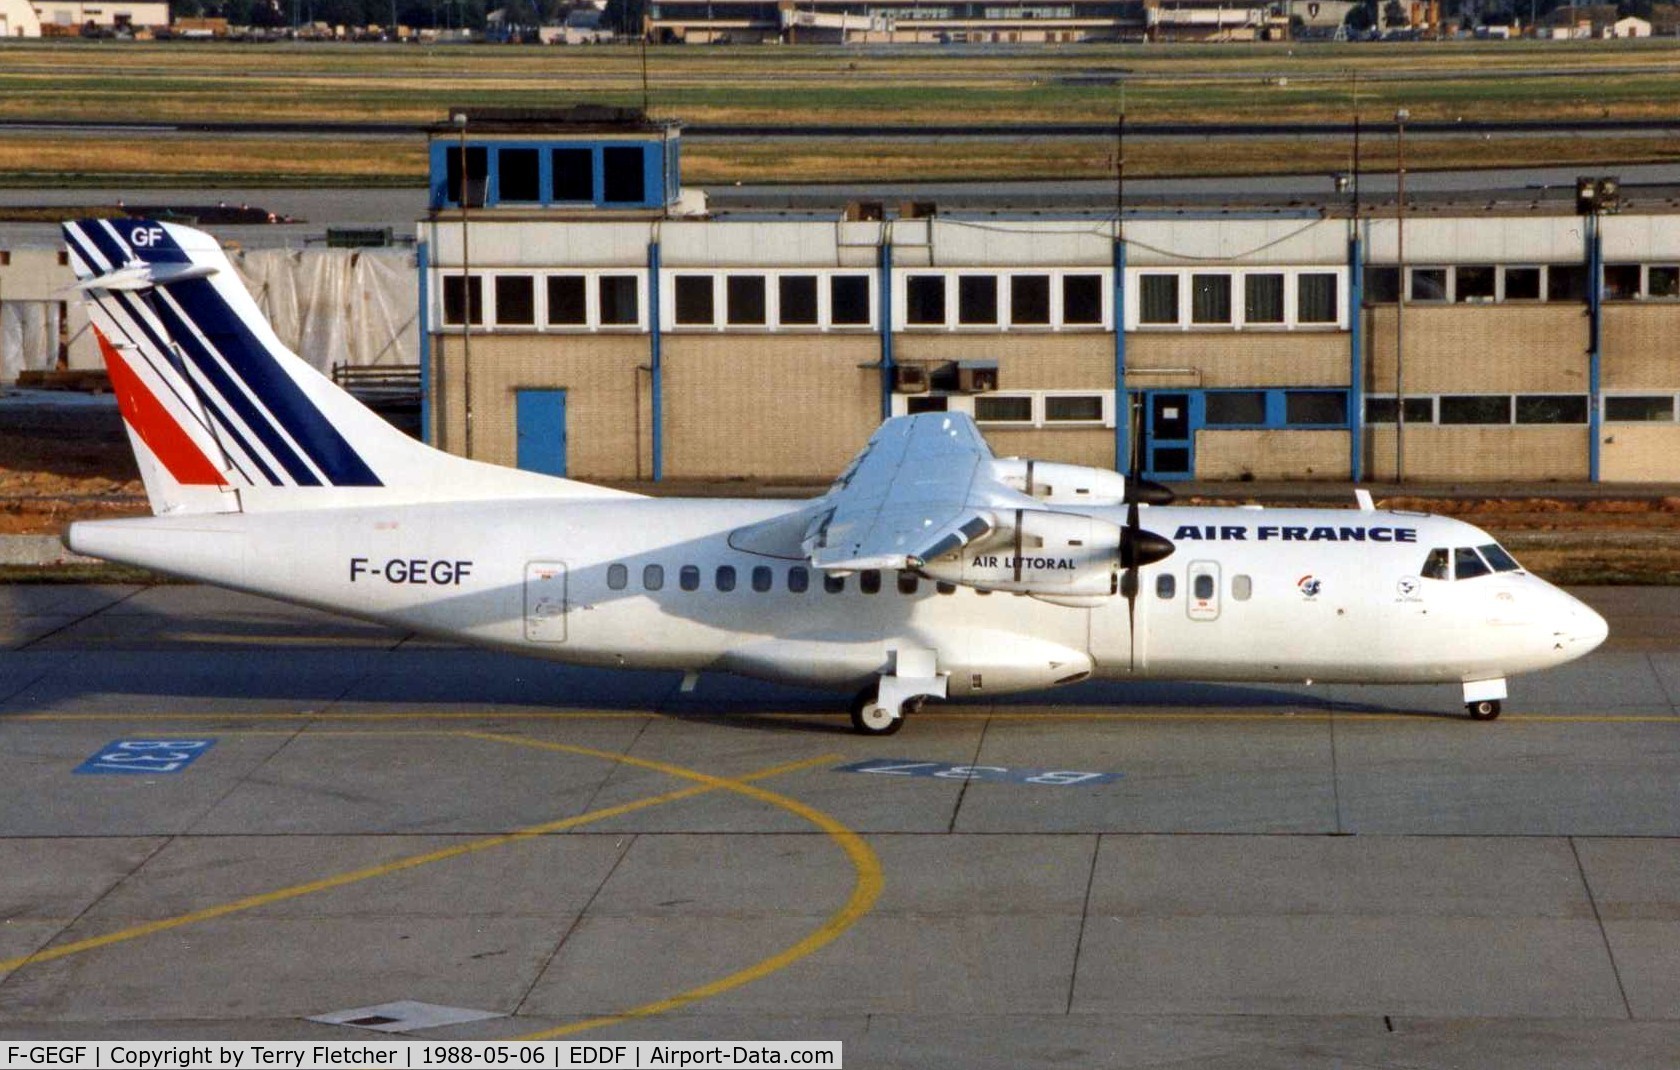 F-GEGF, 1987 ATR 42-320 C/N 036, ATR42 c/n 36 of Air Littoral operated in the colours of Air France in 1988 - seen taxying to depart Frankfurt